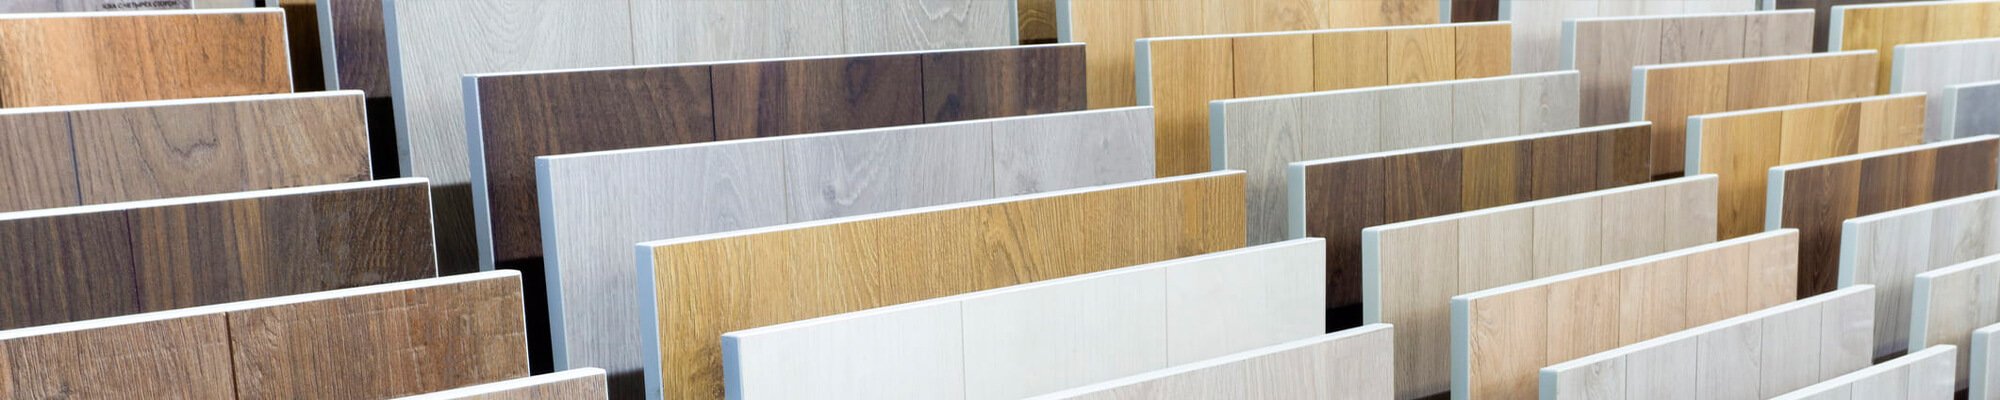 Flooring products at Central Floor Store LLC in Casselberry, Florida